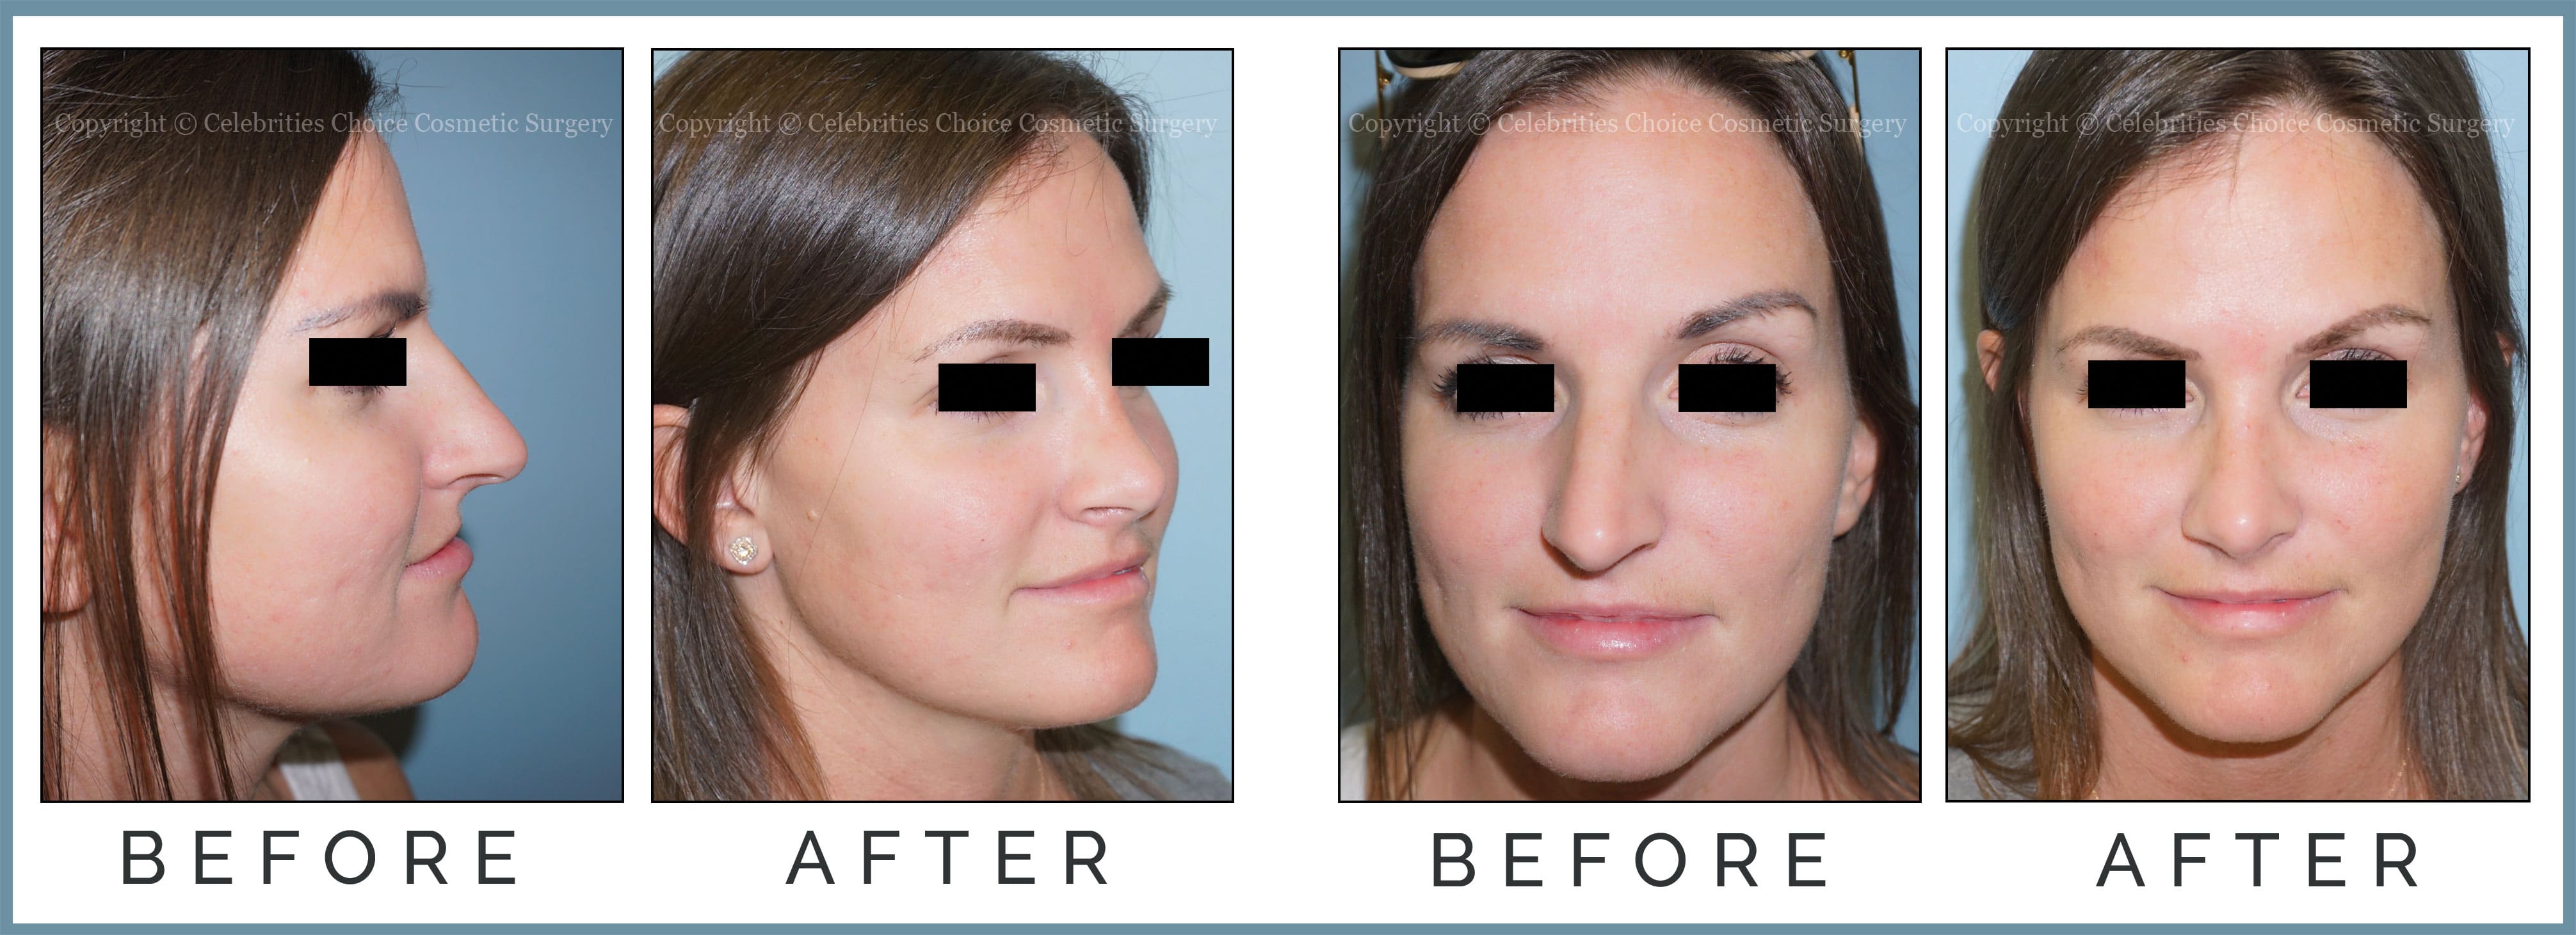 Reduction Rhinoplasty performed through a Closed Technique